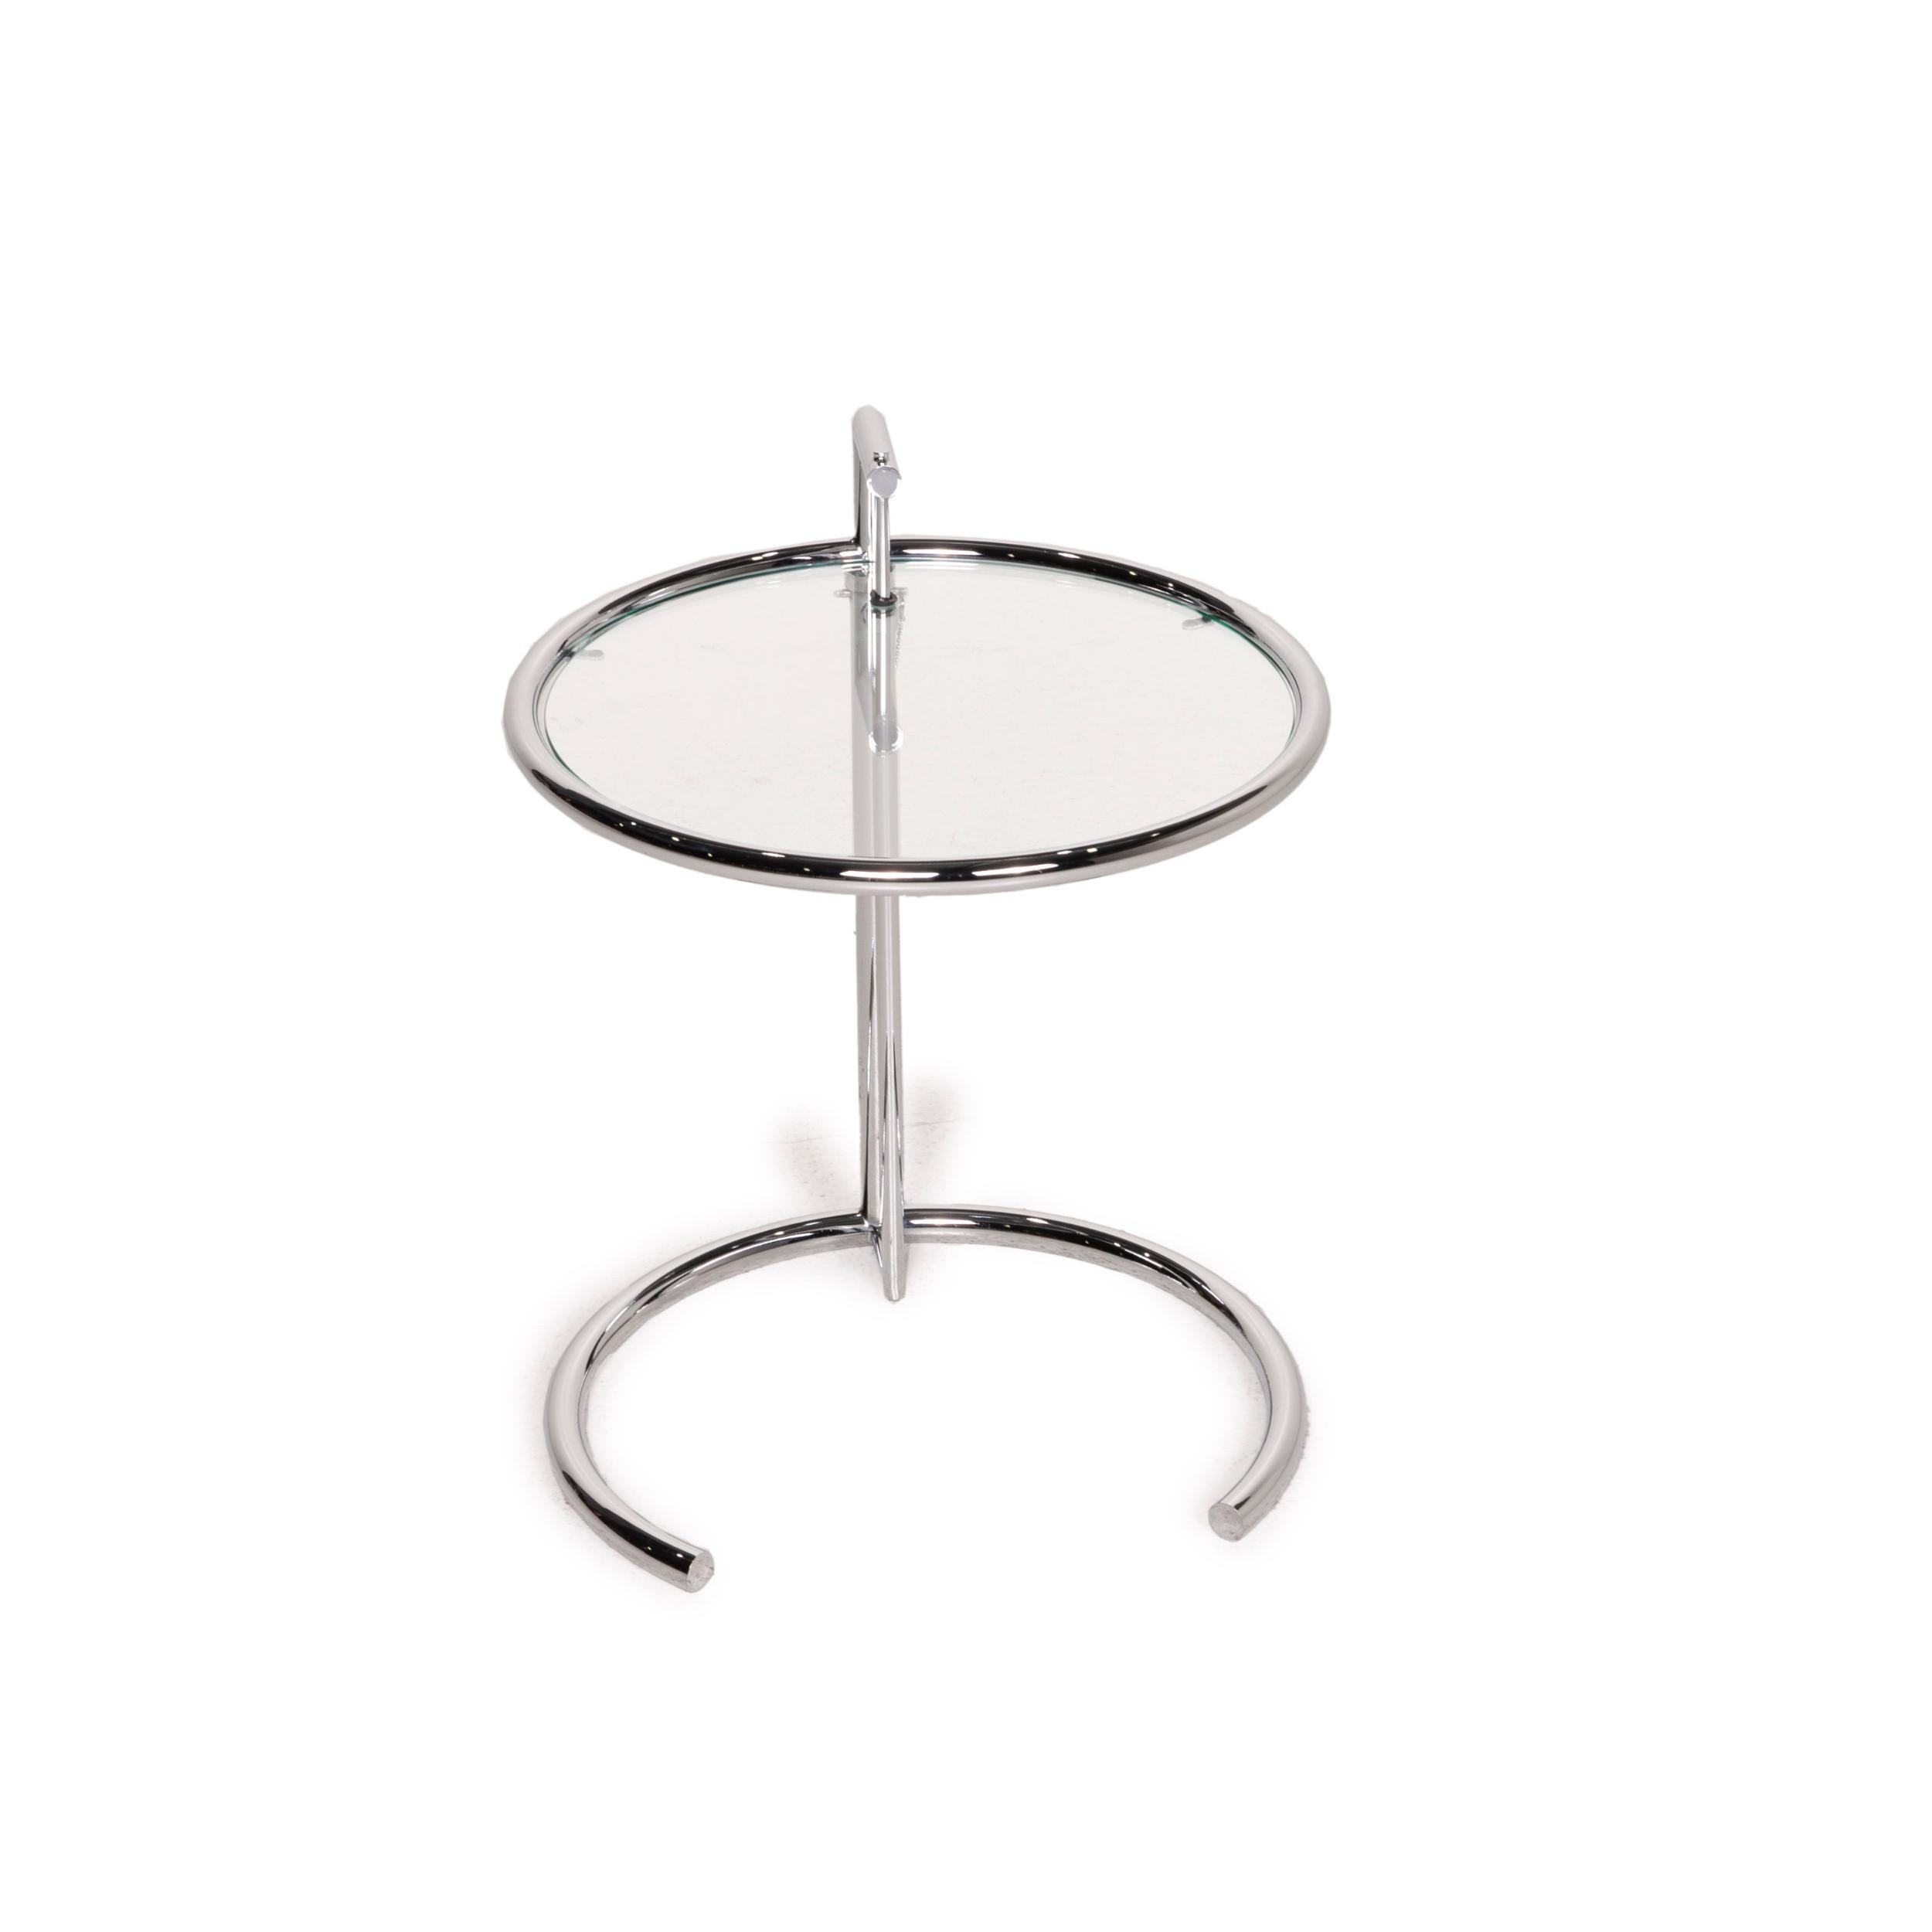 European ClassiCon Adjustable Table E1027 Glass Table Side Table Chrome by Eileen Gray